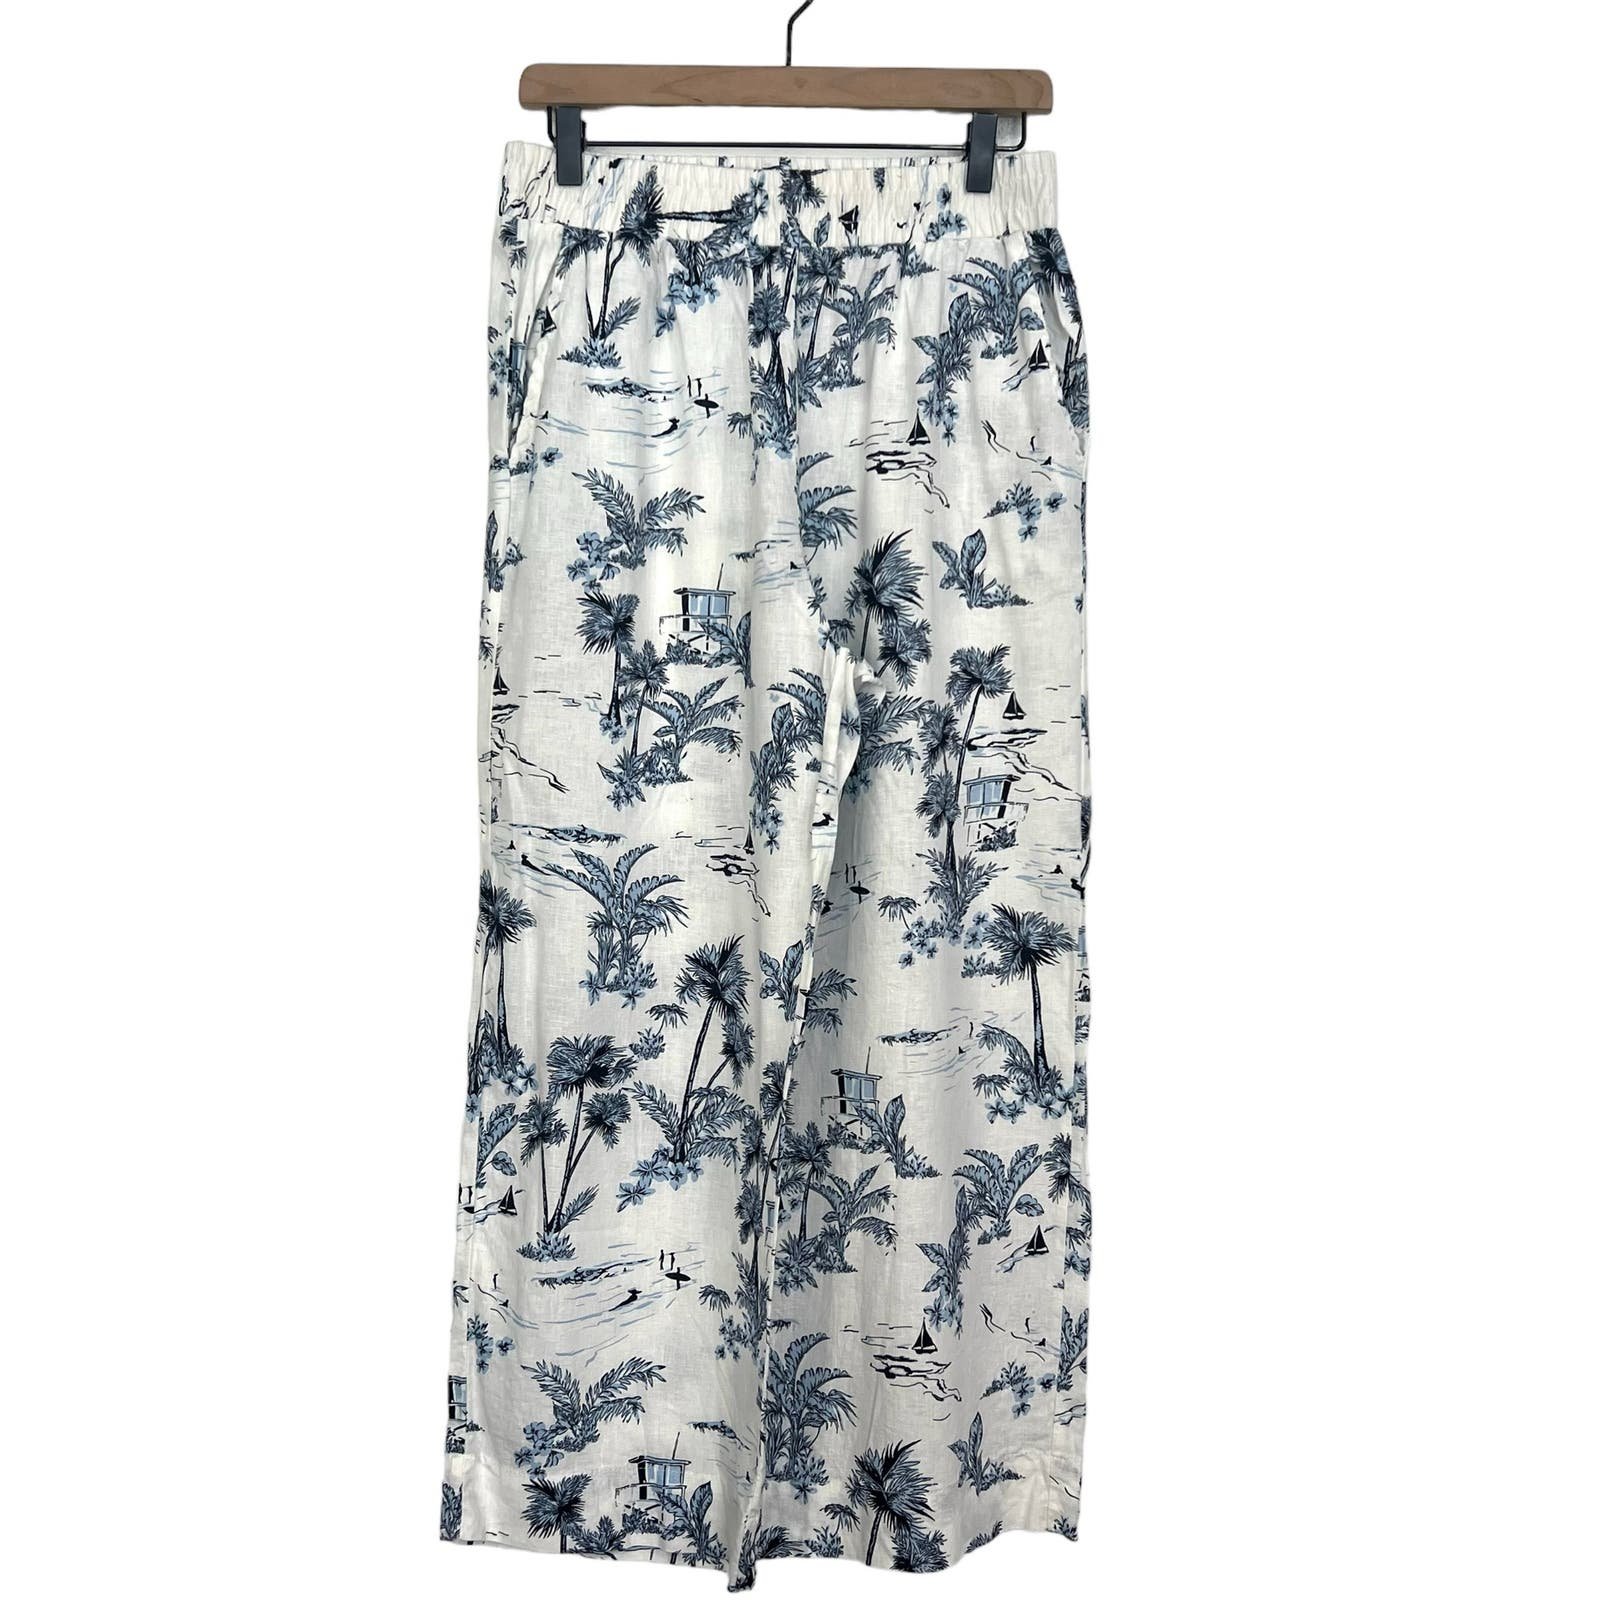 Affordable C&C California Women´s Wide Leg Linen Cropped Pull On Pants Size M Blue White nHWK3vqjW online store